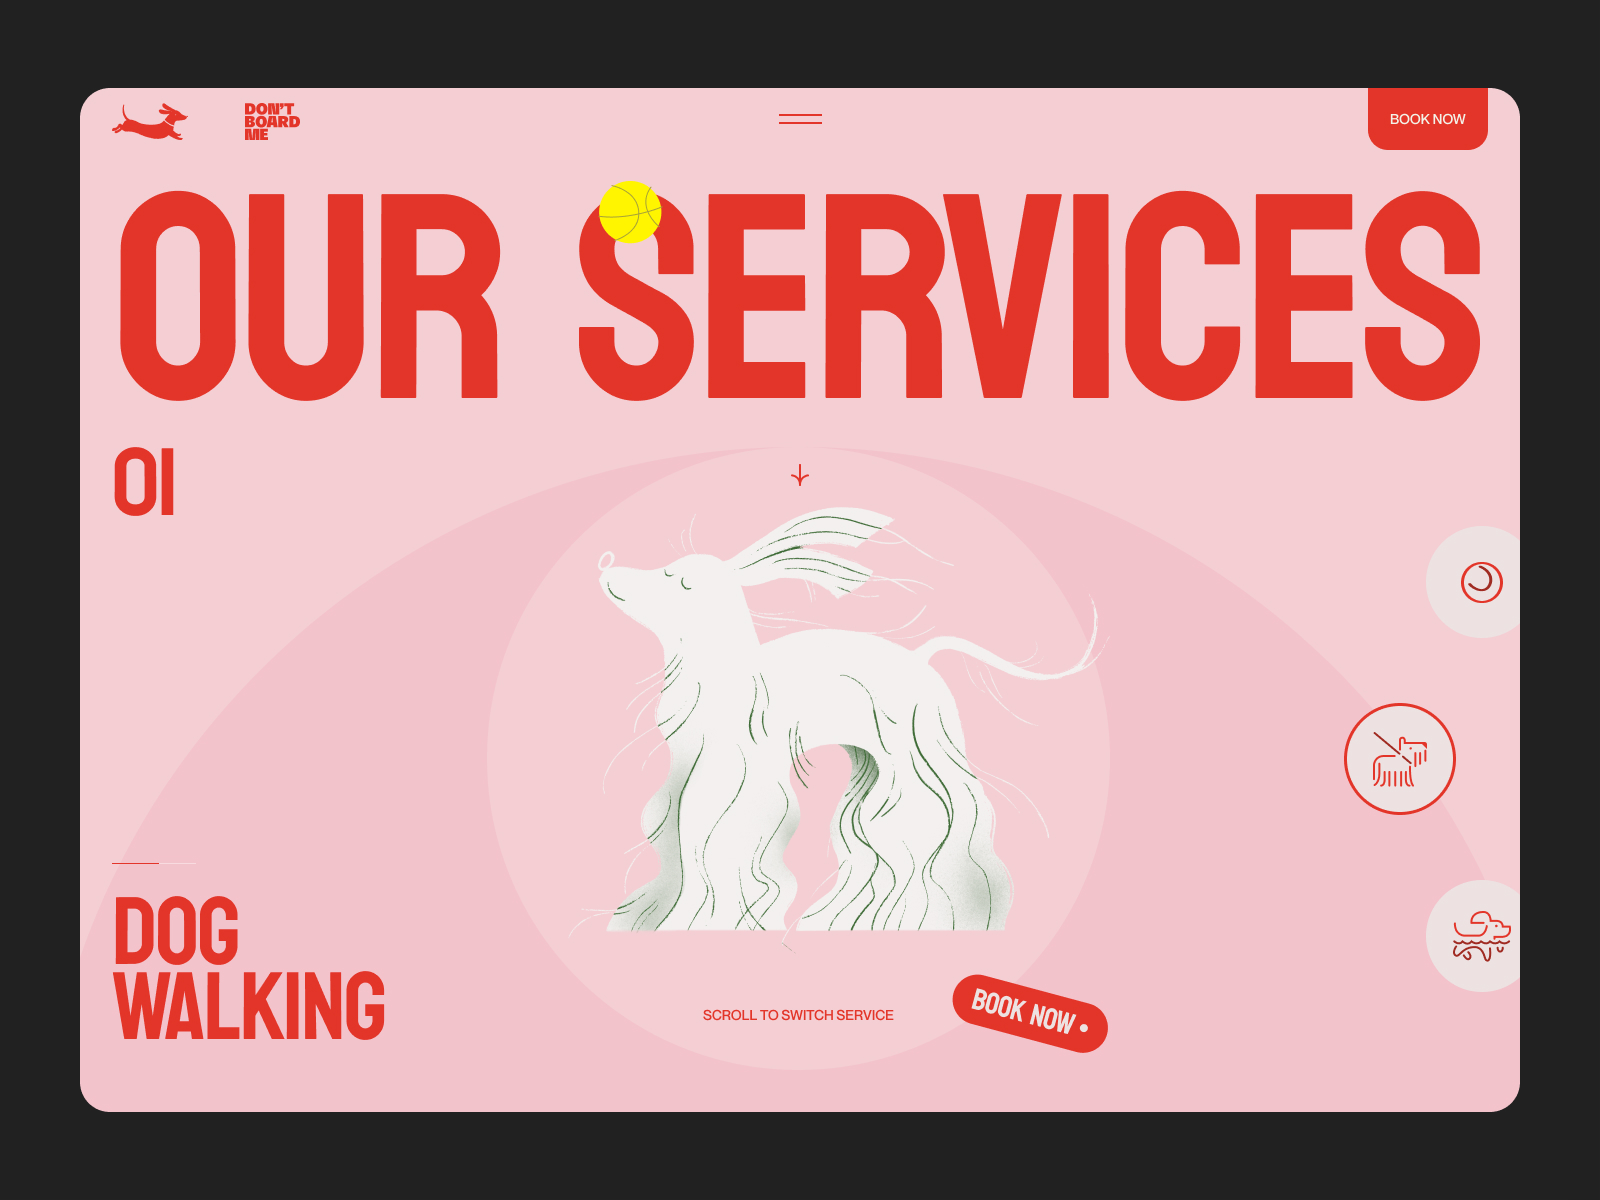 Our Services, Woof 🐶